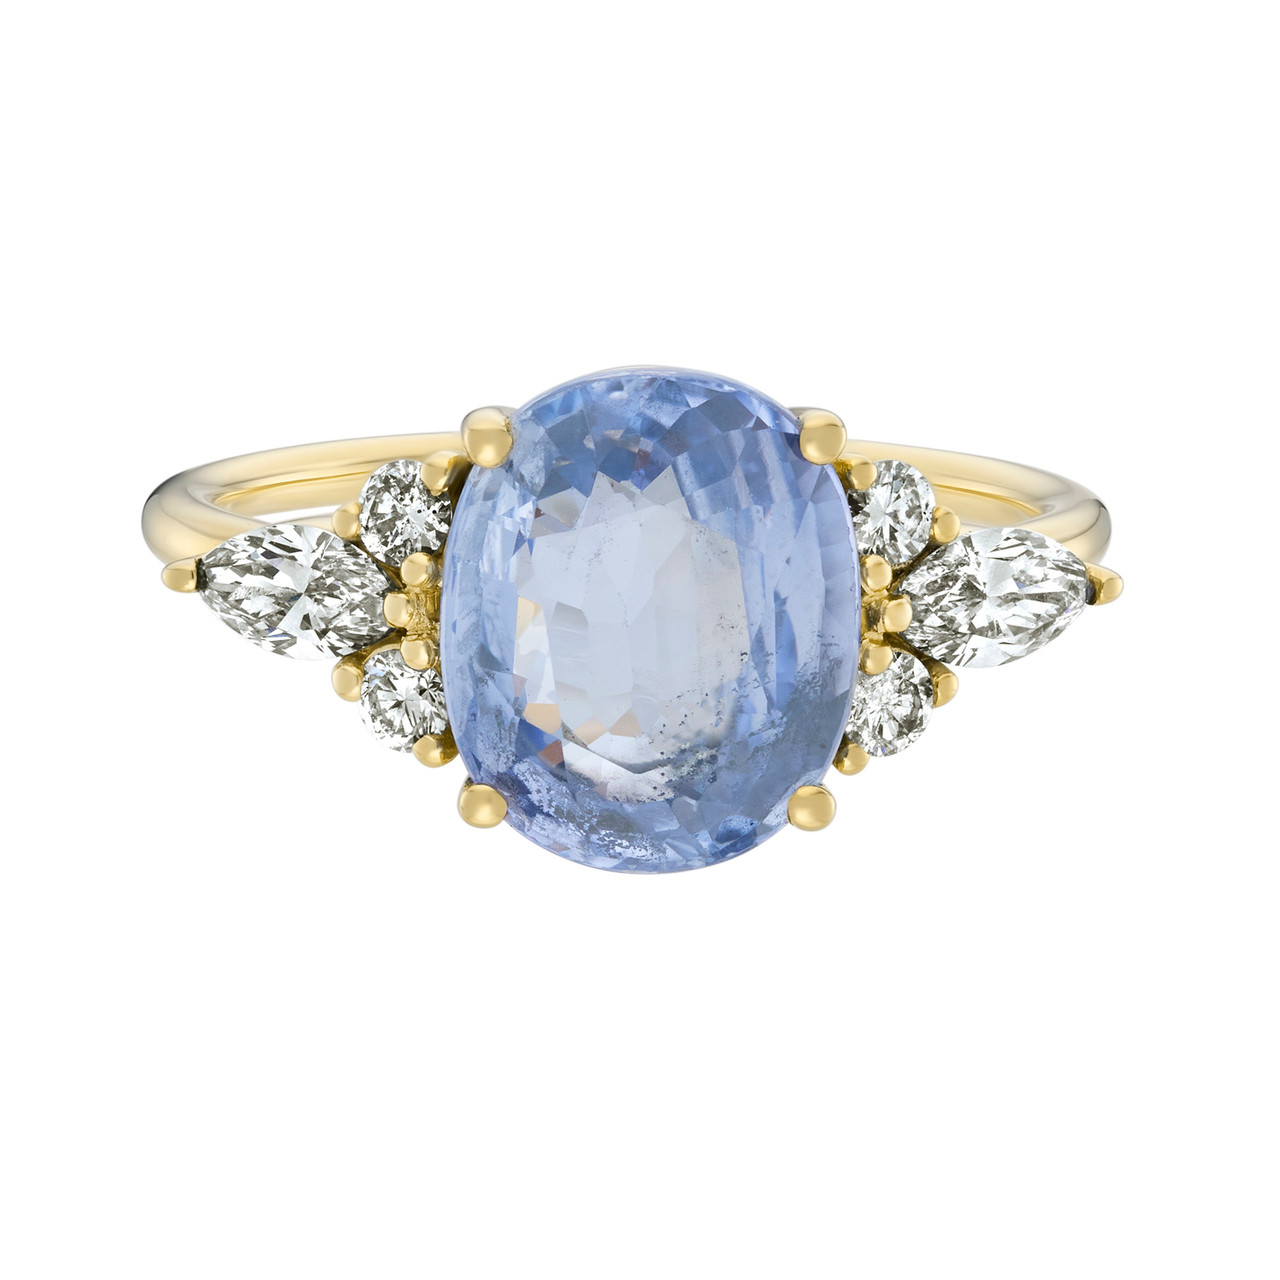 Eugenie Champagne Diamond & Blue Oval Sapphire Ring, tf House - Art Echo, tomfoolery